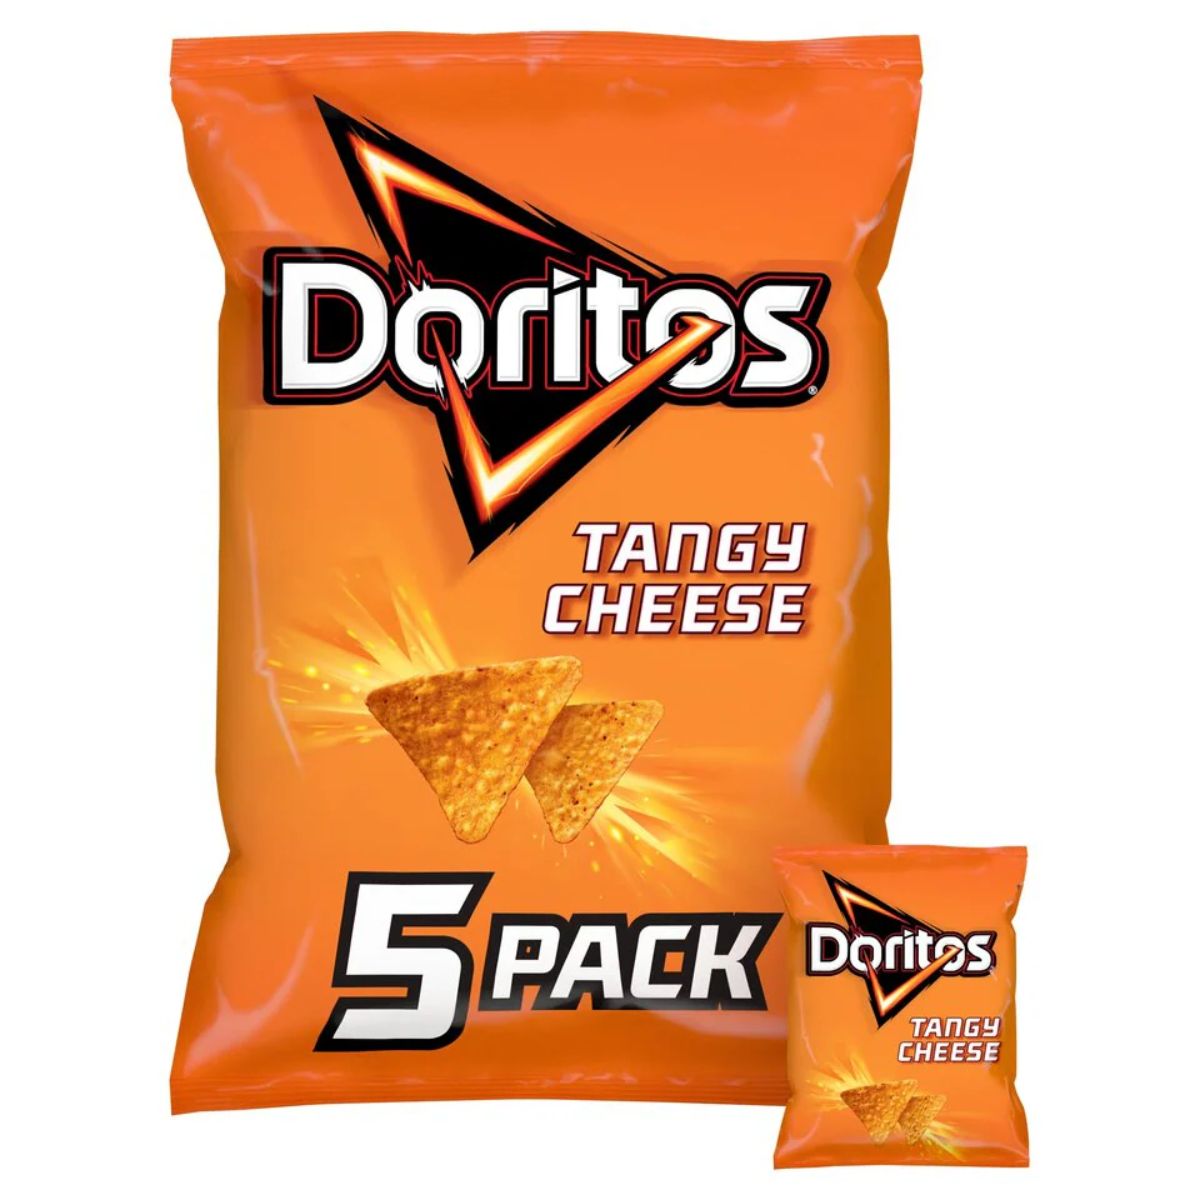 Doritos - Tangy Cheese - 5 Pack 5 pack.